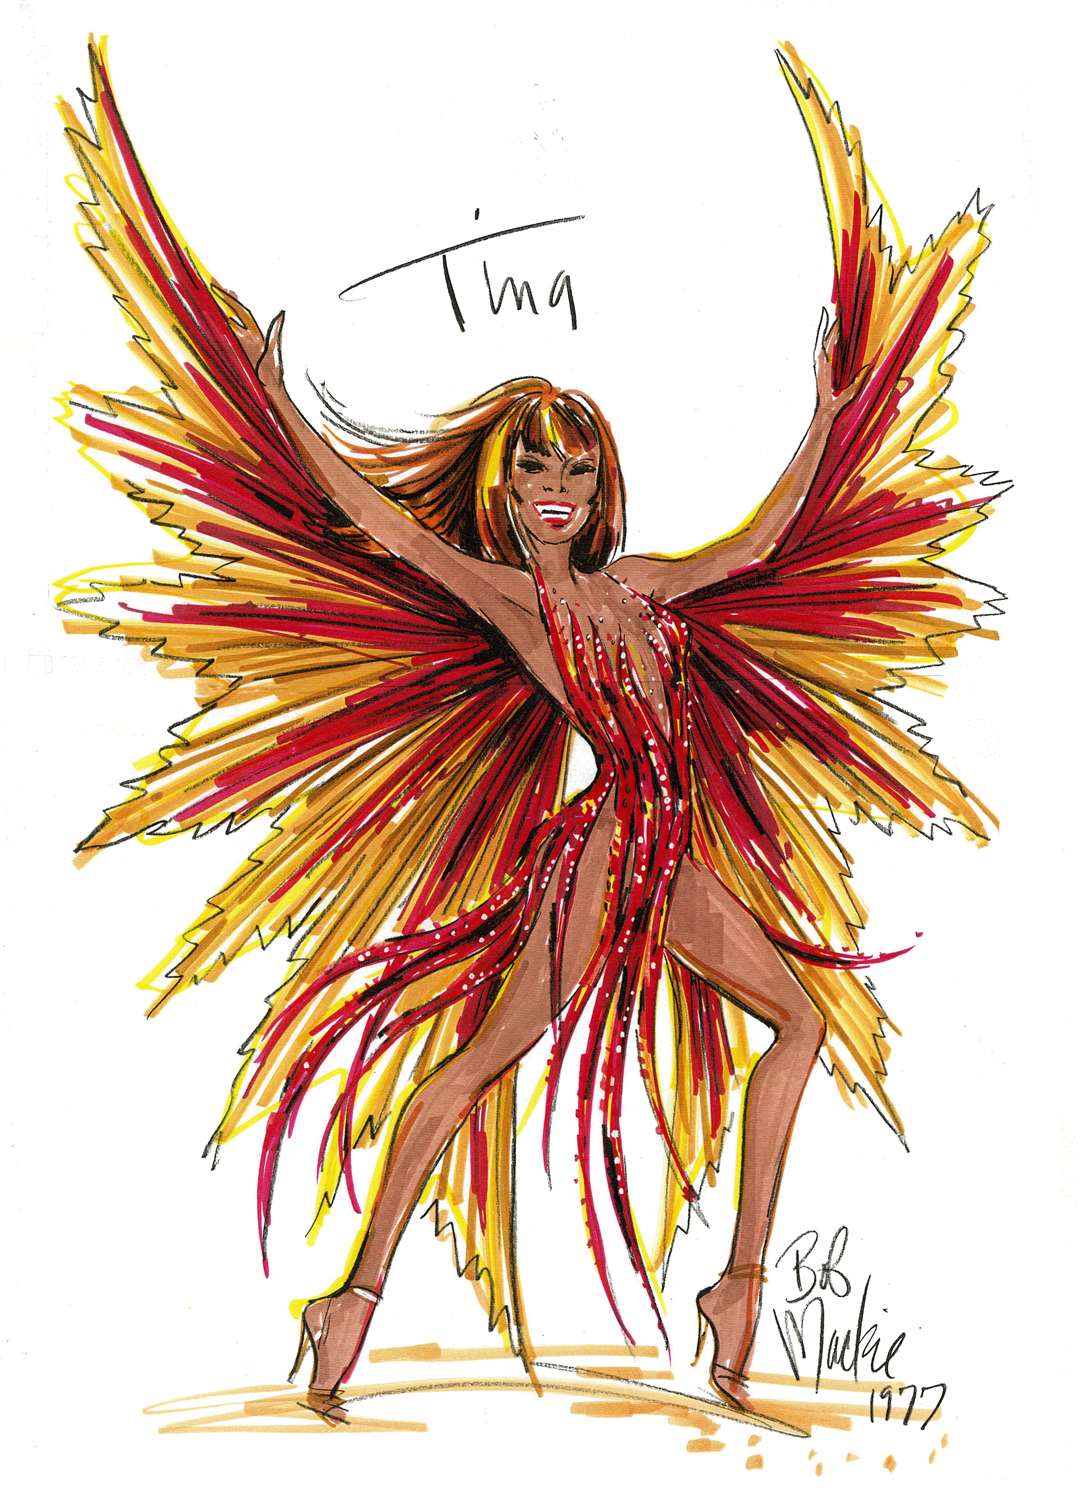 A sketch by Bob Mackie of a design for singer Tina Turner which will feature in the exhibition (Bob Mackie/V&A/PA)